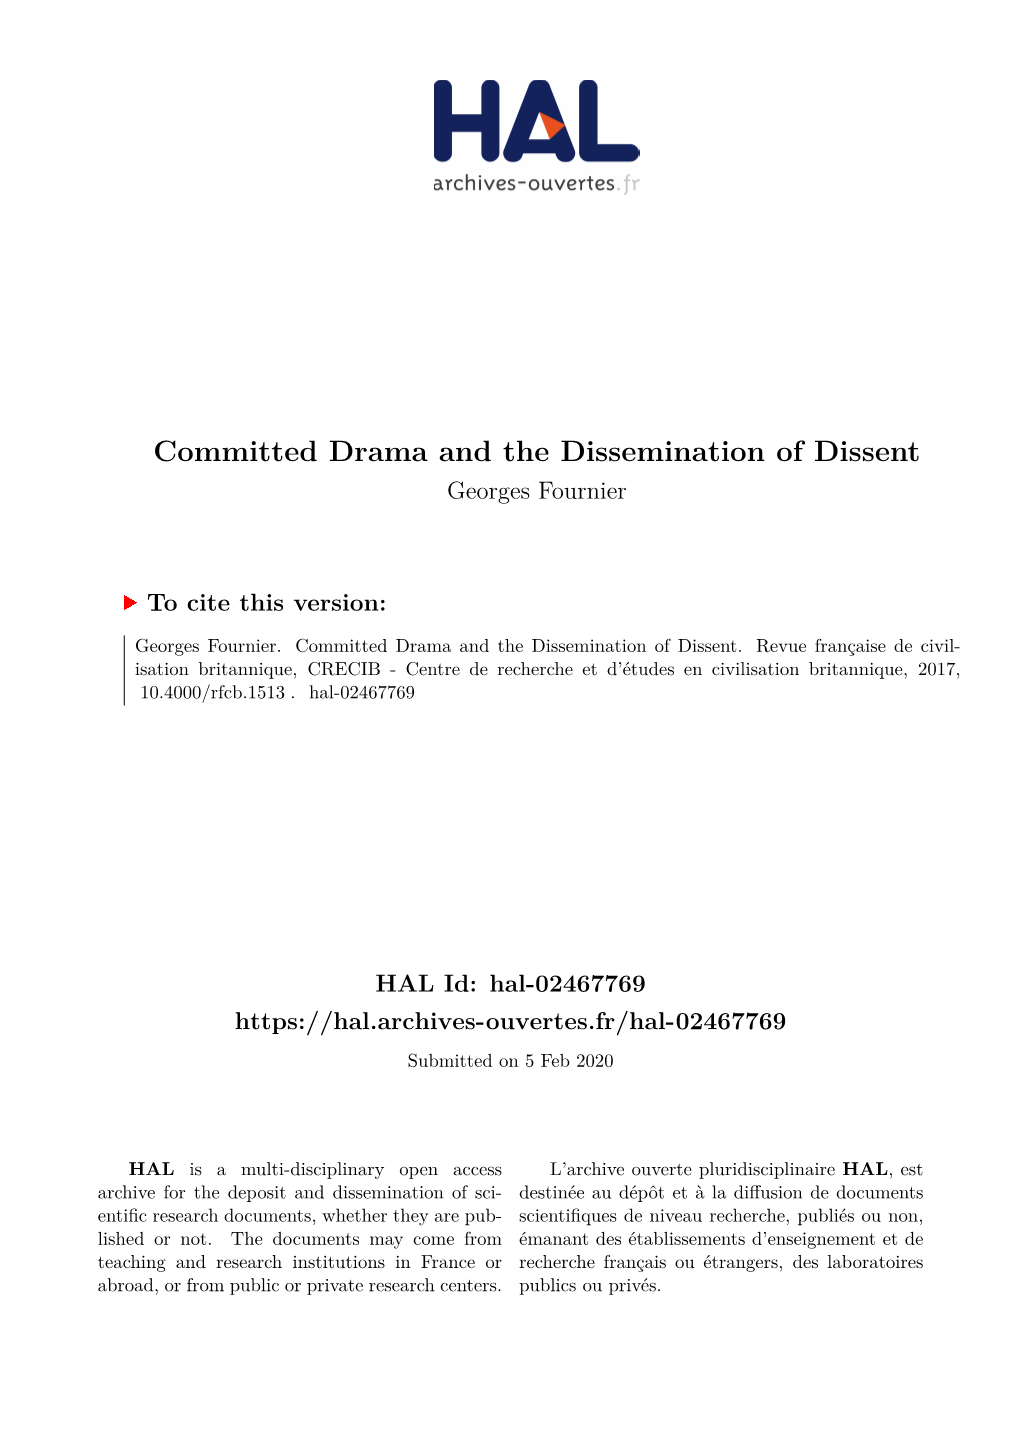 Committed Drama and the Dissemination of Dissent Georges Fournier